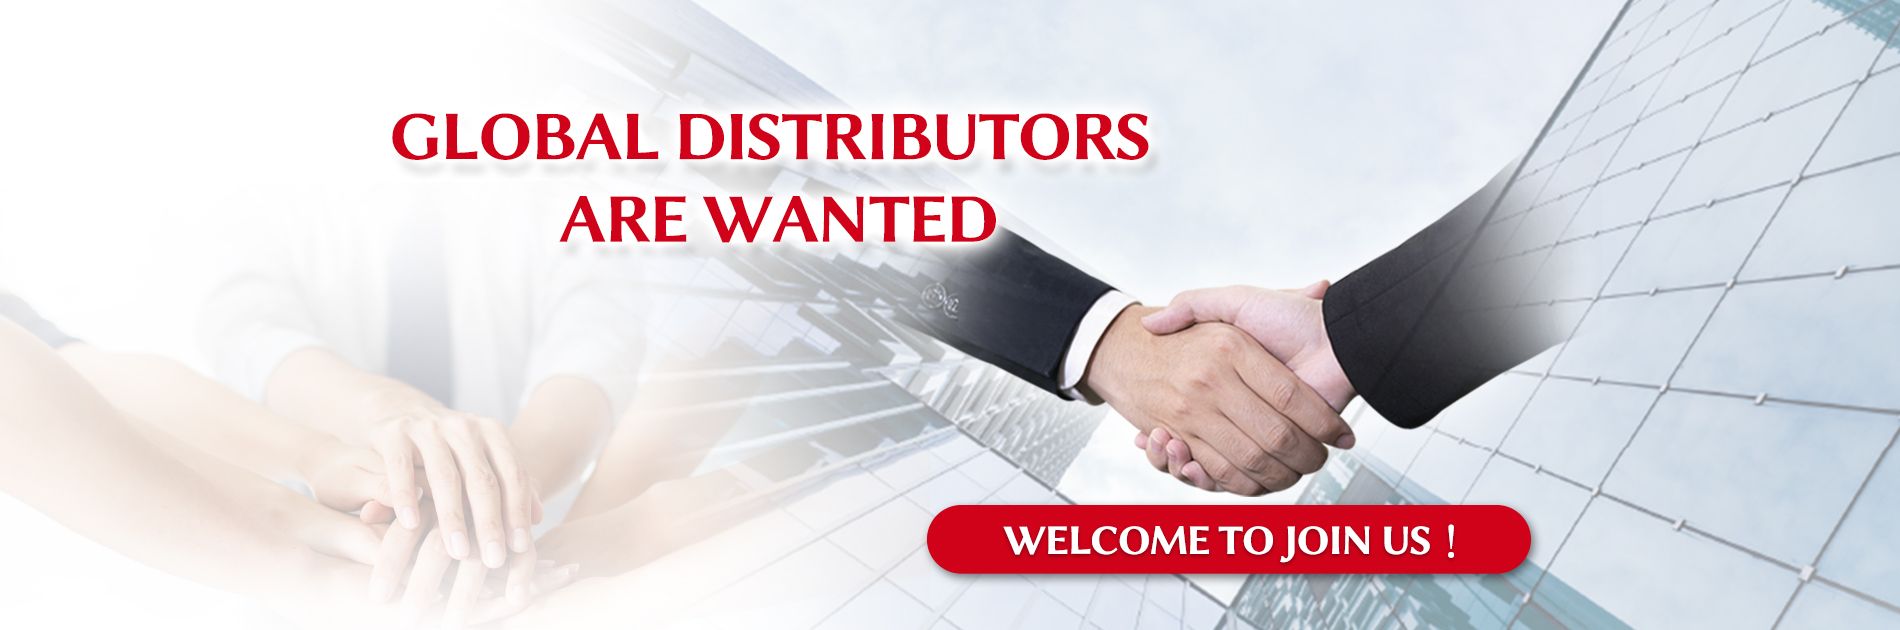 Global Distributor Are Wanted